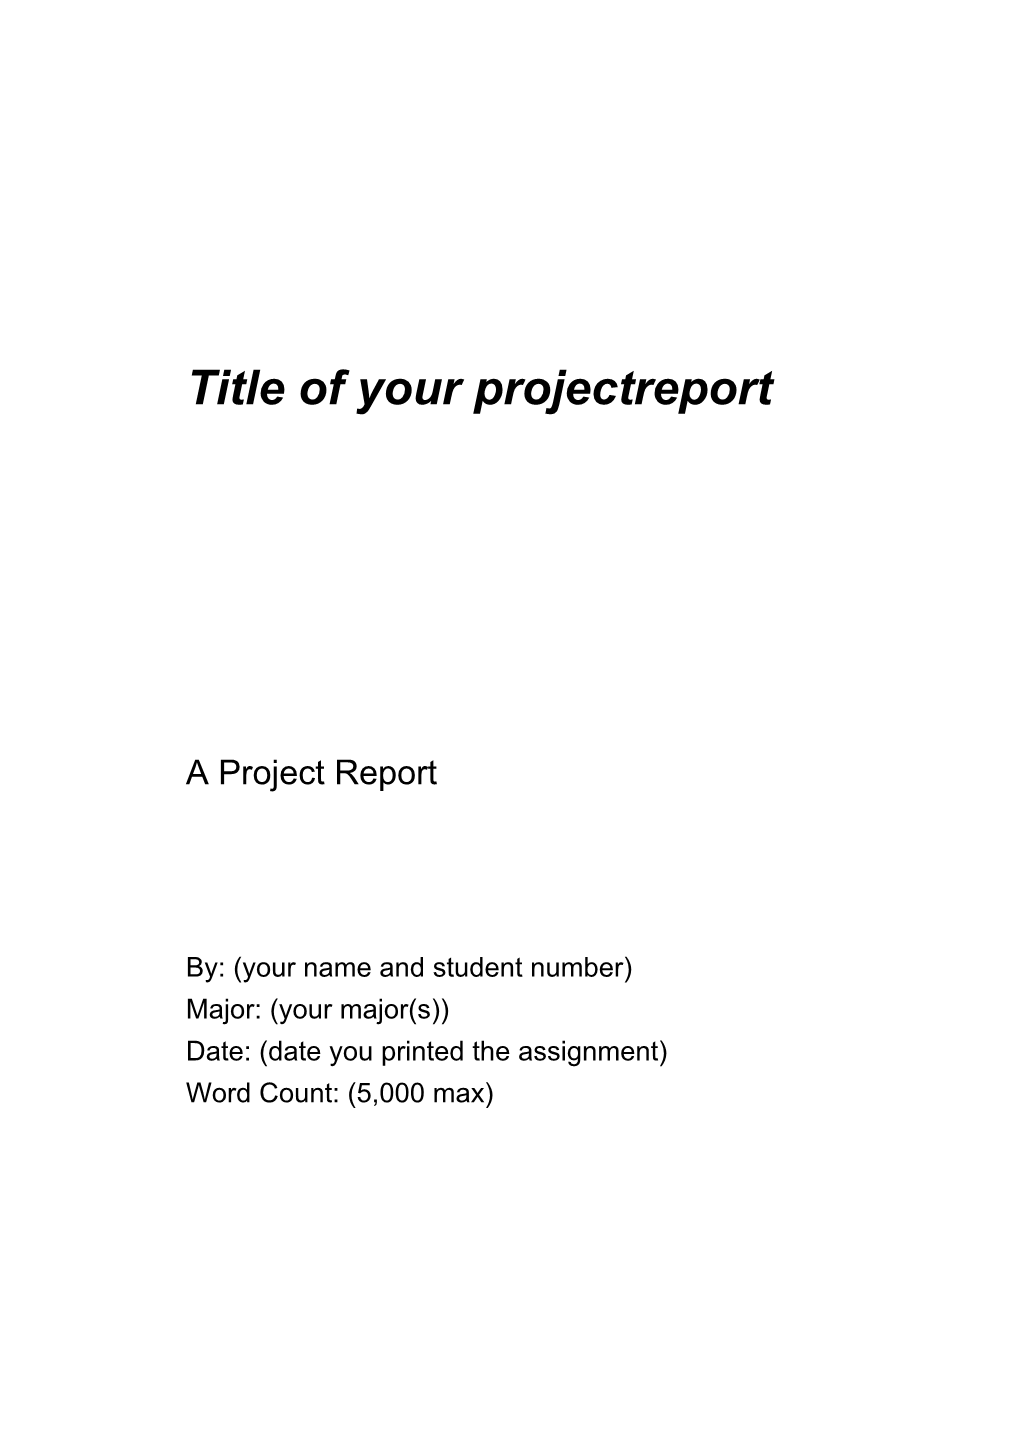 Title of Your Projectreport